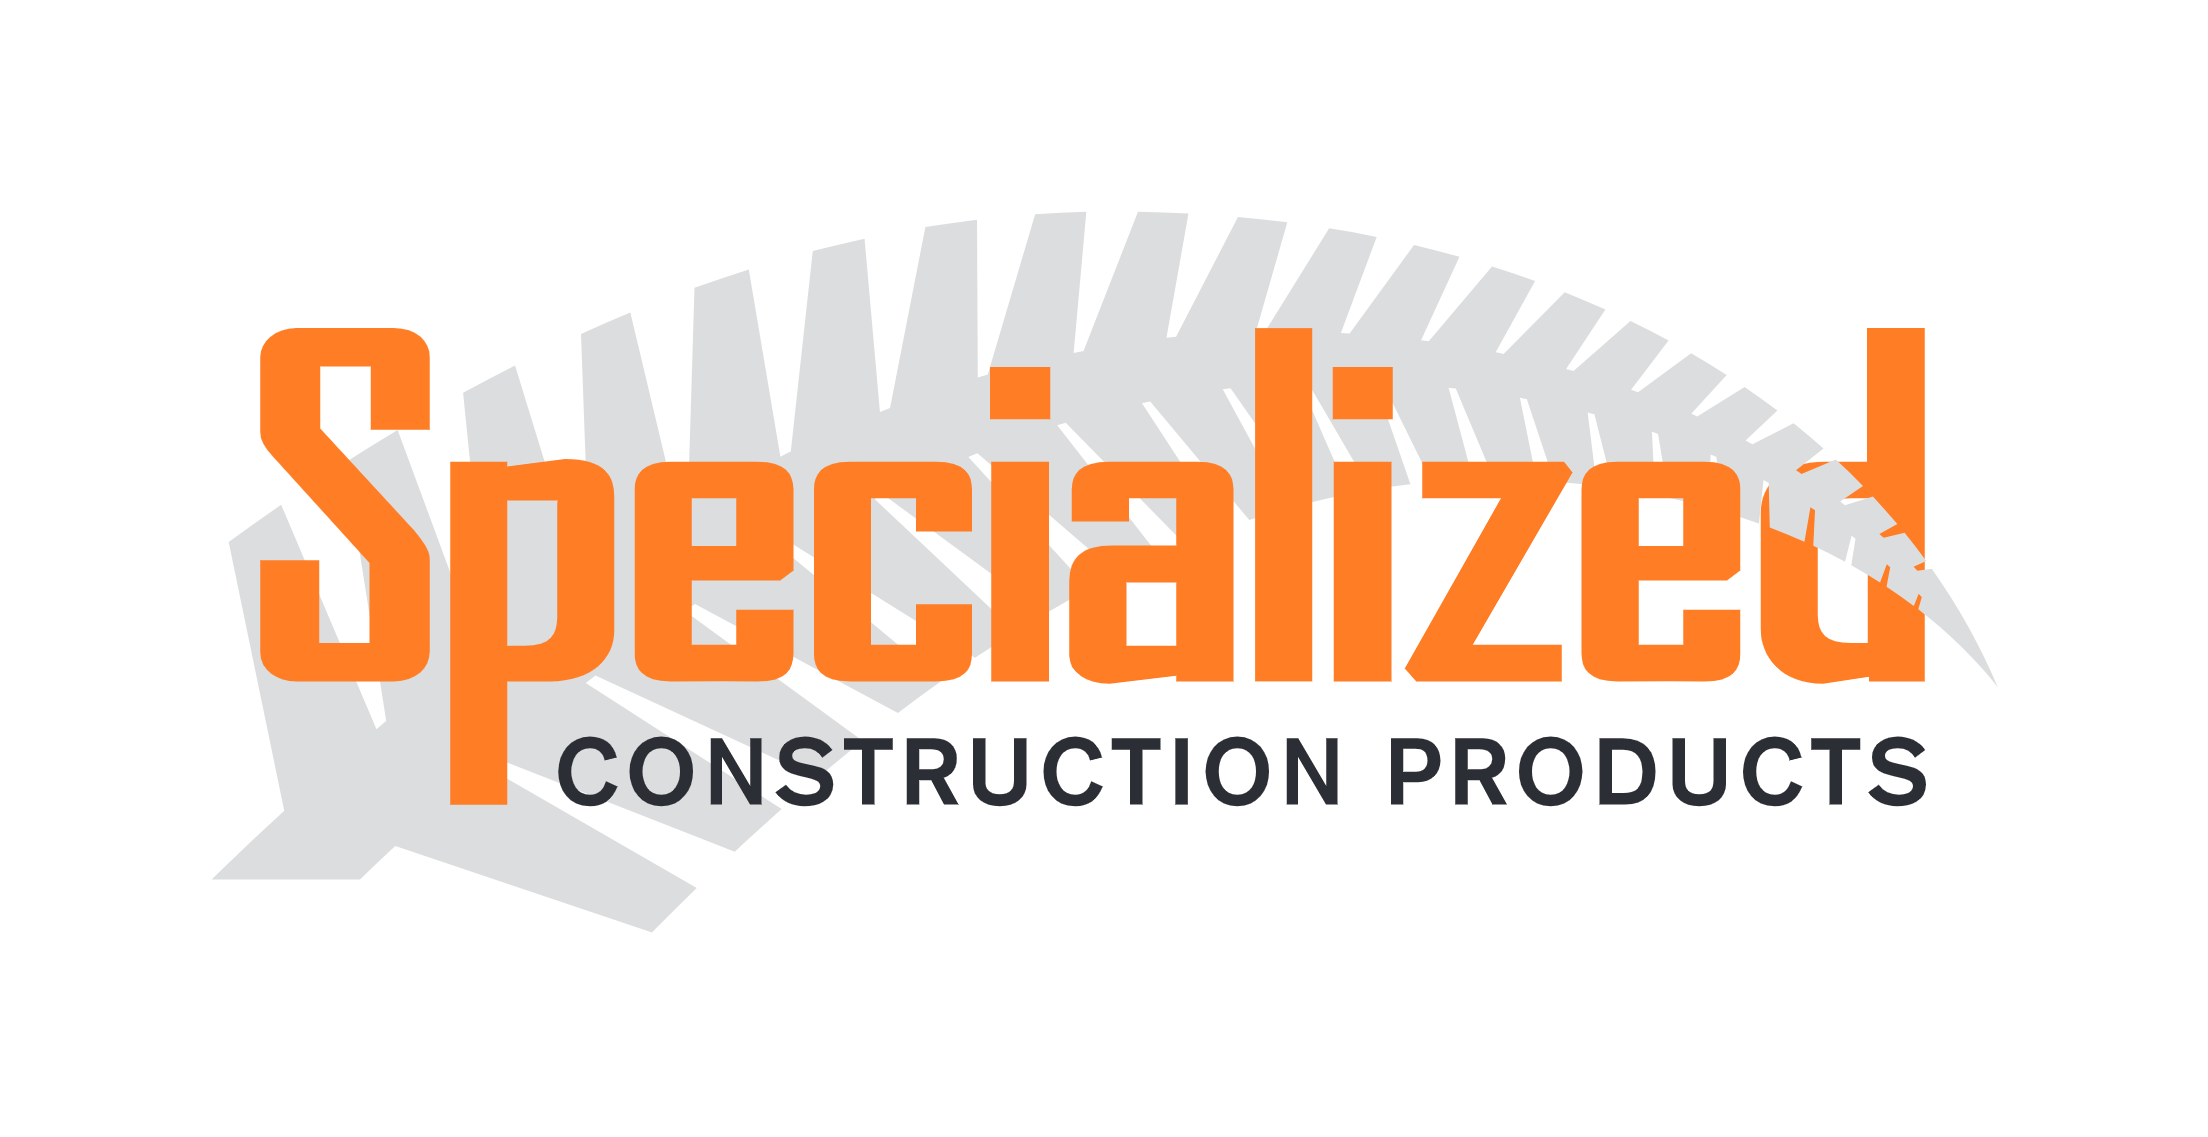 PNG image of the Specialized logo